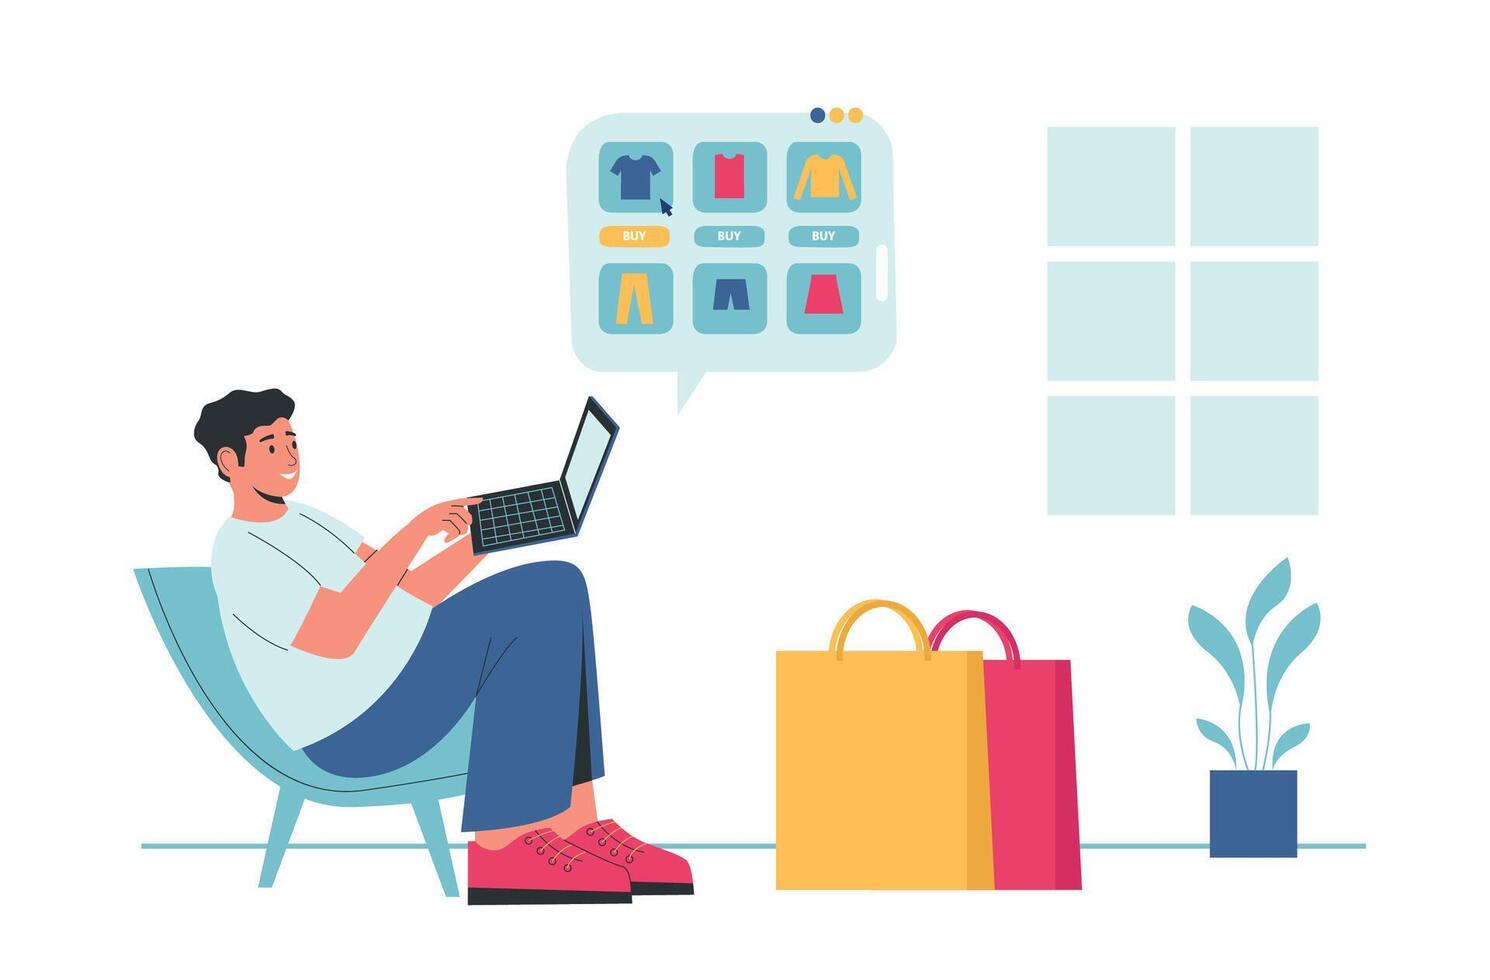 Online shopping. Man sitting with laptop and choosing clothes in shop. Guy buying goods in internet. Male character vector